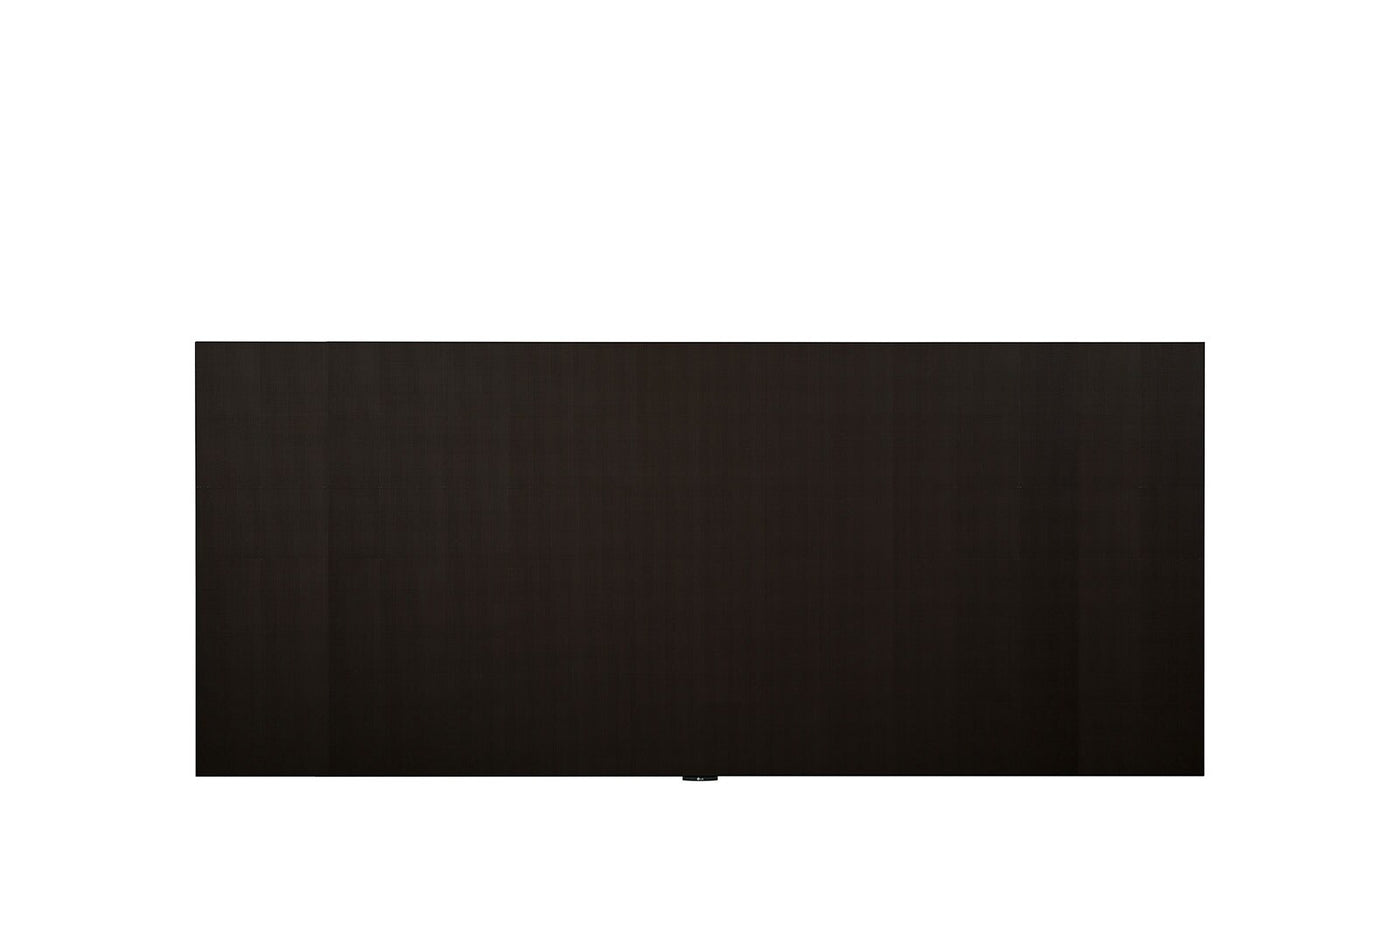 LG LAED 171'' All-in-One Direct View LED Display with 21:9 Aspect Ratio, Embedded Controller, & Built-in Speakers